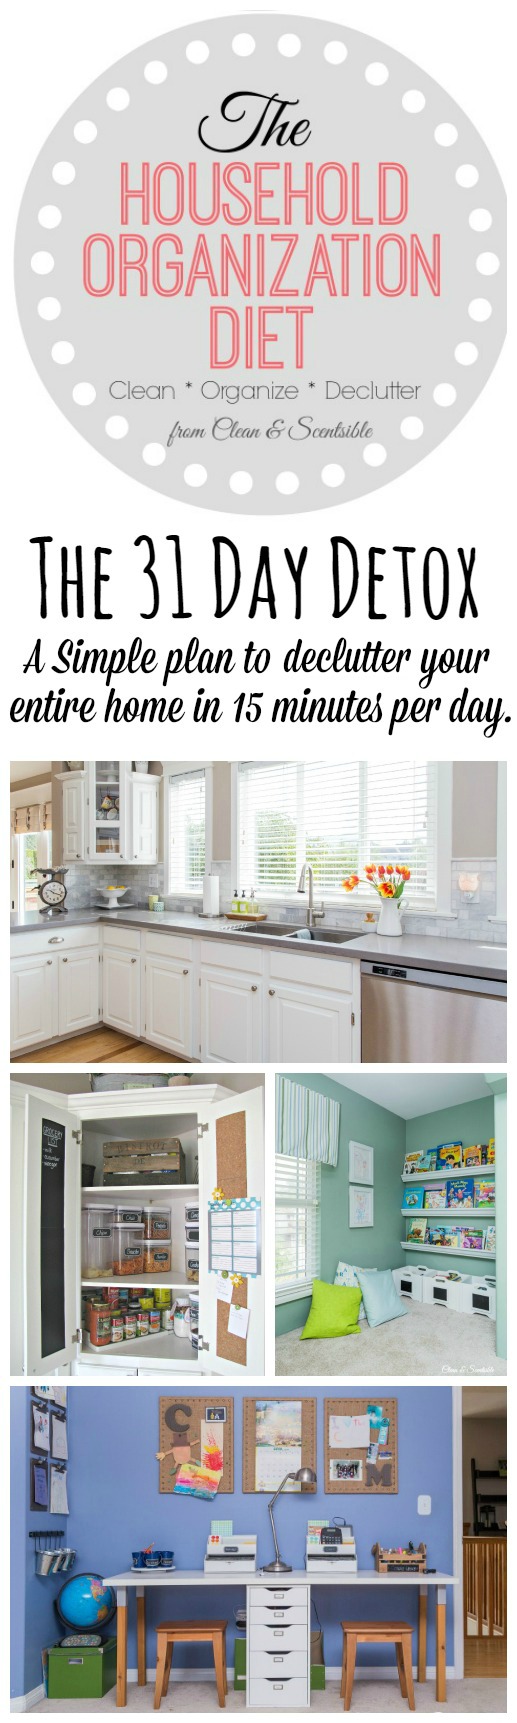 Follow this simple 31 day plan to jumpstart your decluttering process!